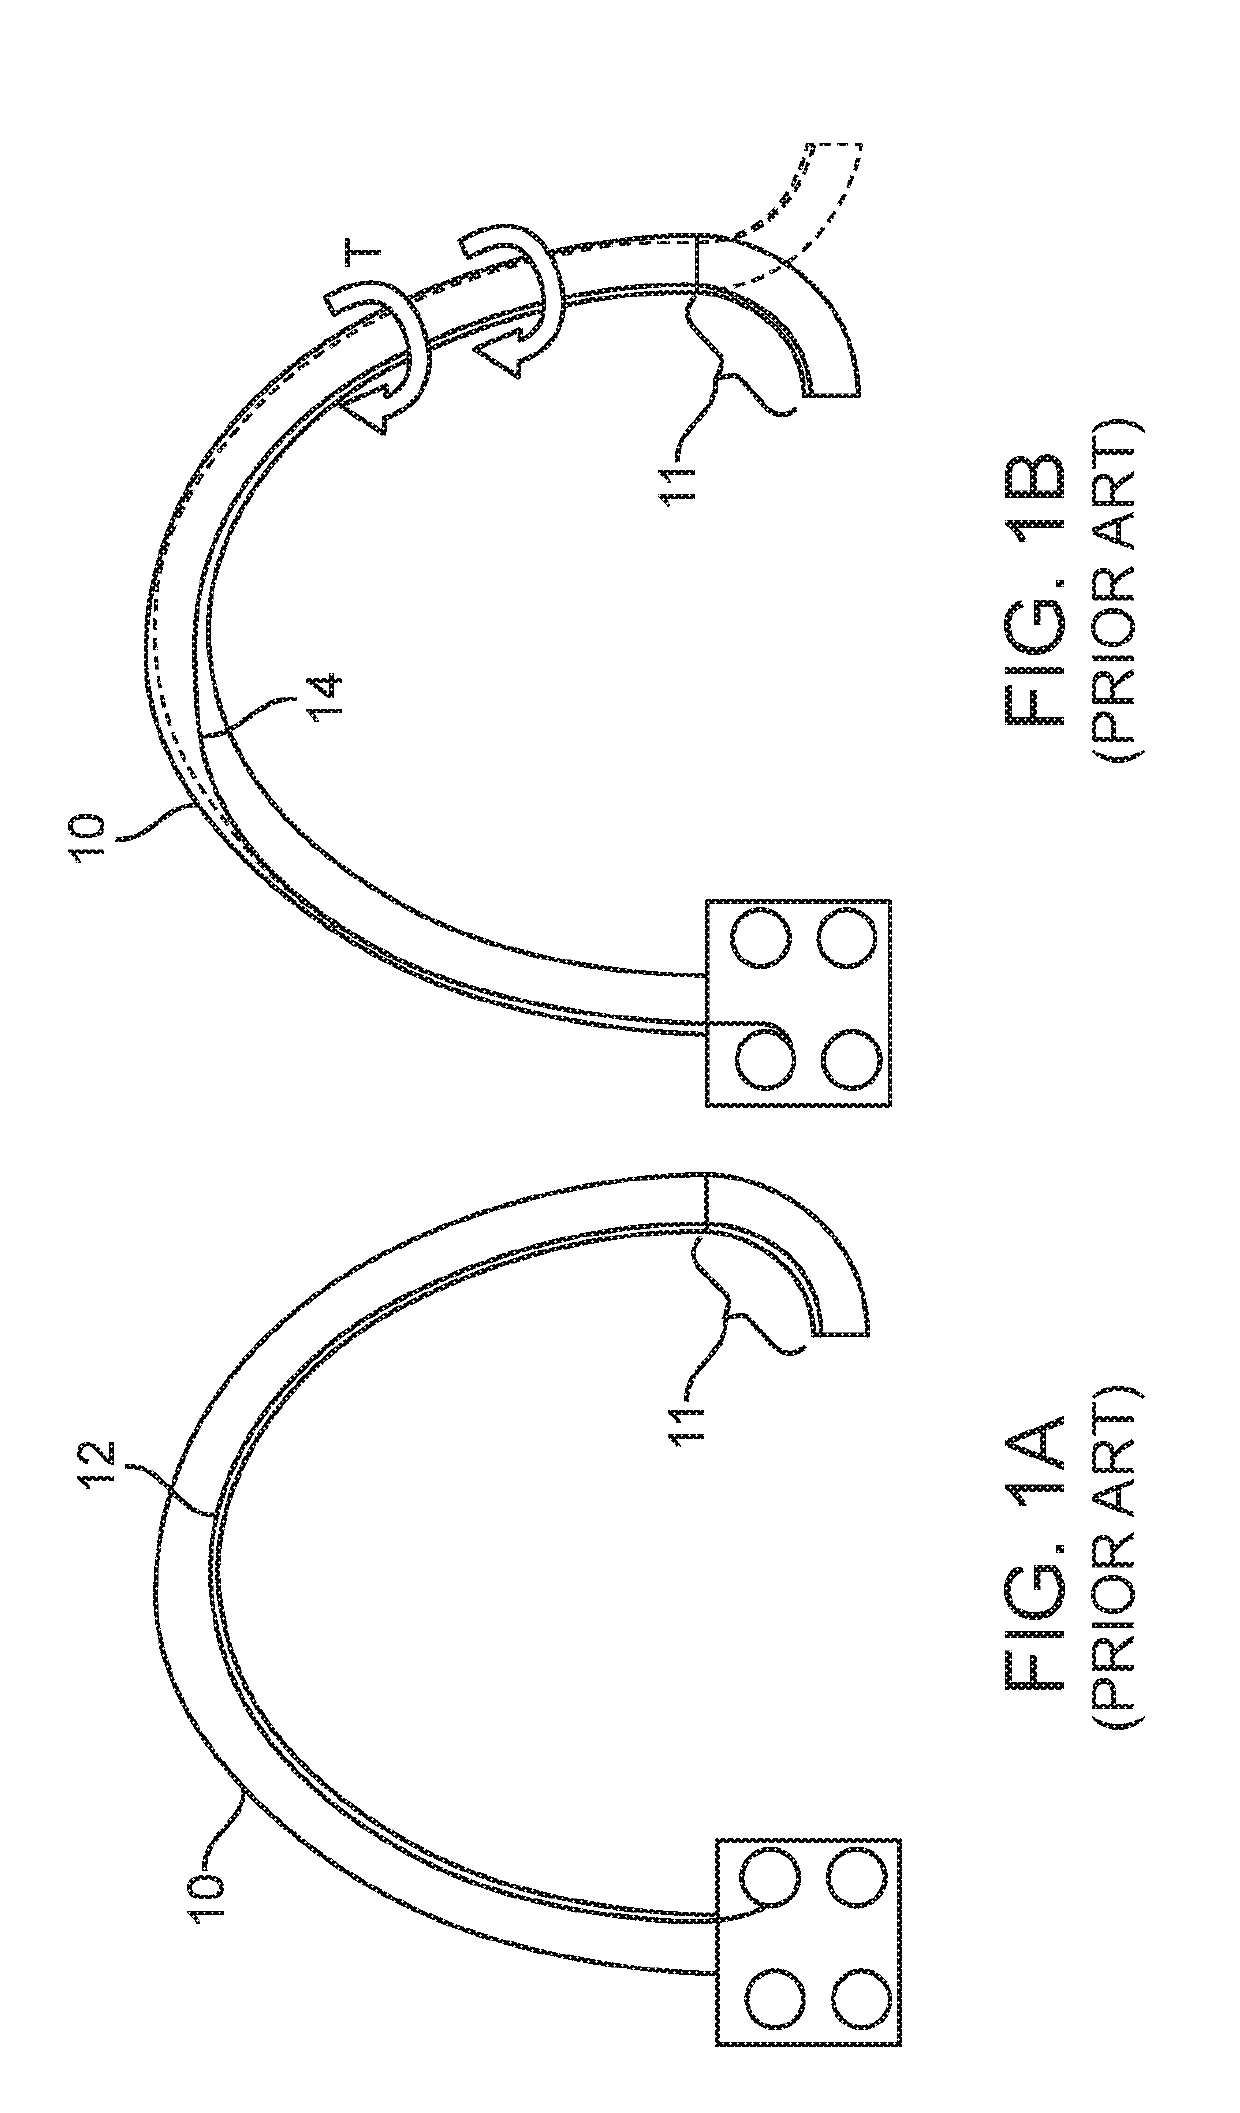 Steerable catheter with shaft load distributions